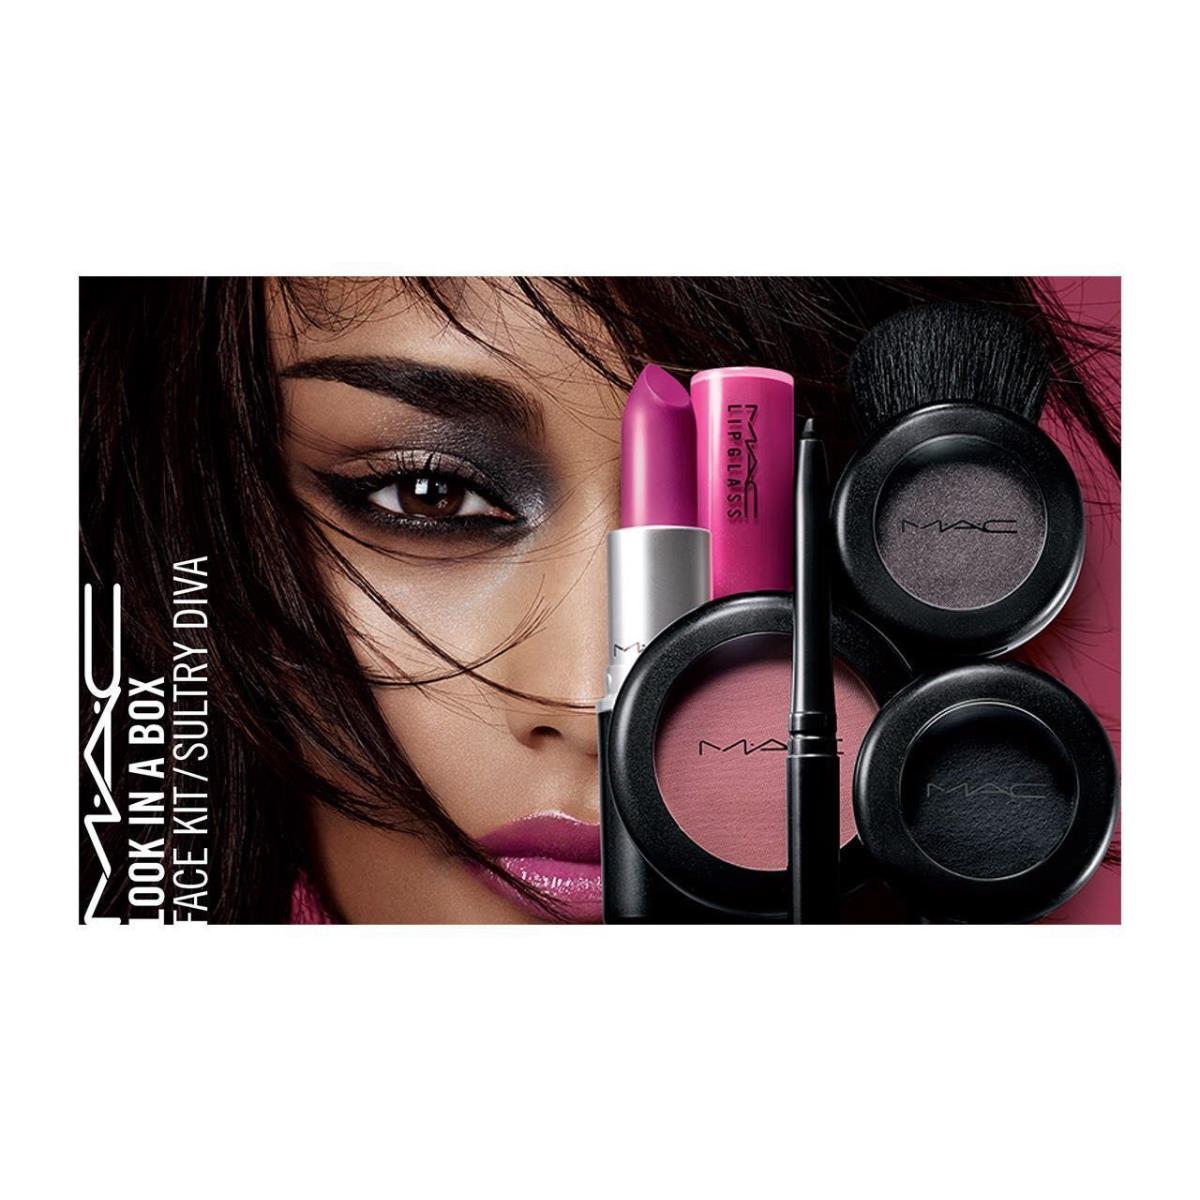 Mac Cosmetics Look in a Box Face Kit - Sultry Diva Limited Edition